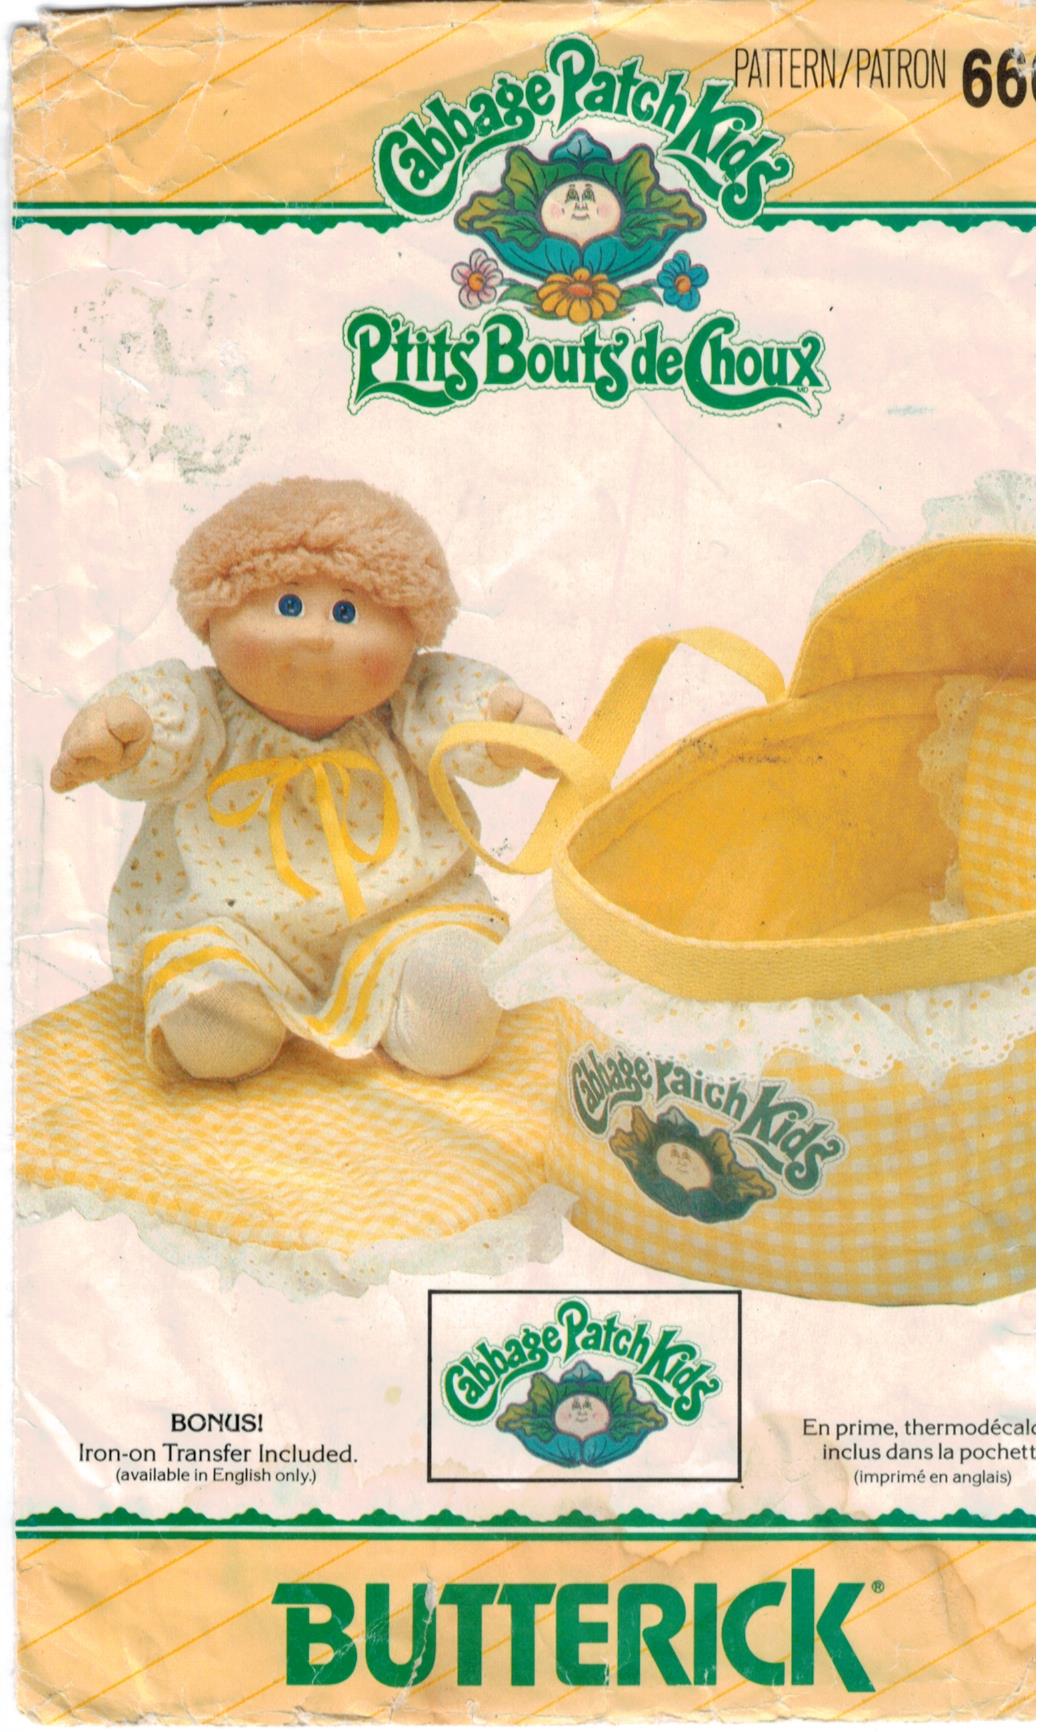 cabbage patch carrier